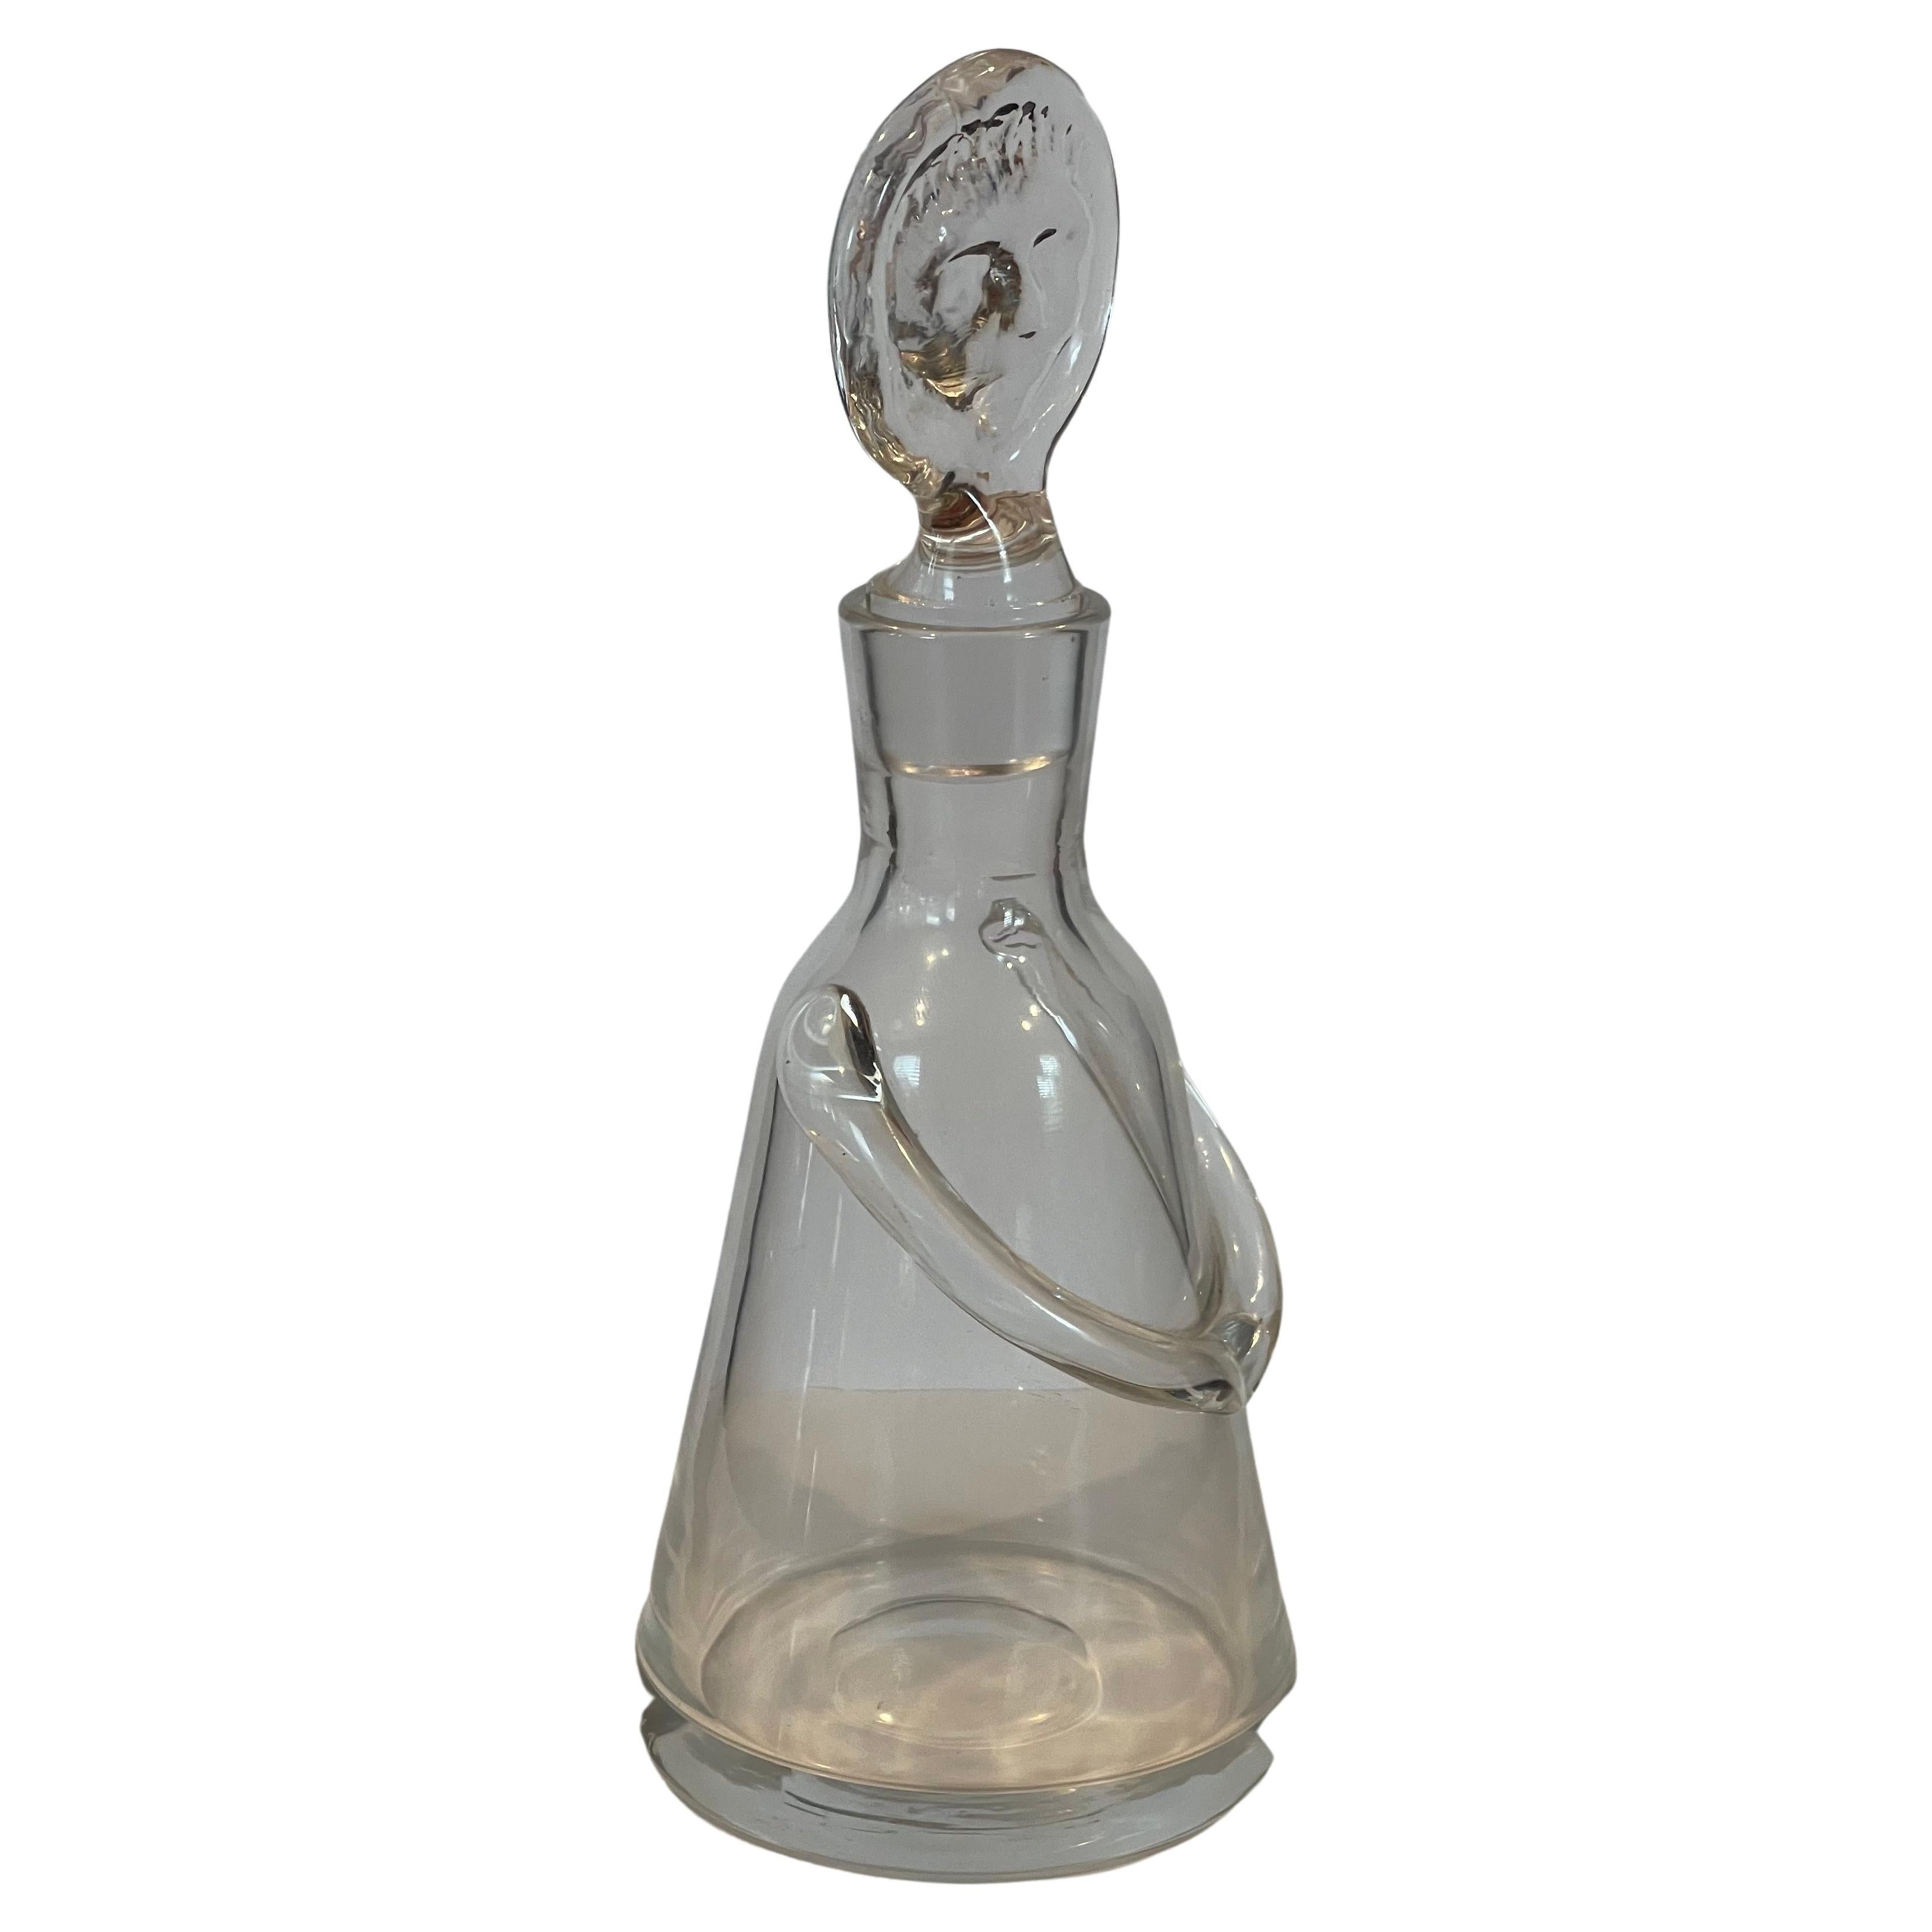 A super rare small figural glass decanter by Erik Hoglund for Boda Glassworks of Sweden, circa 1960s. The decanter is in very good condition with the exception of a small chip on the tip of the stopper (cannot see when it is inserted in bottle.) 